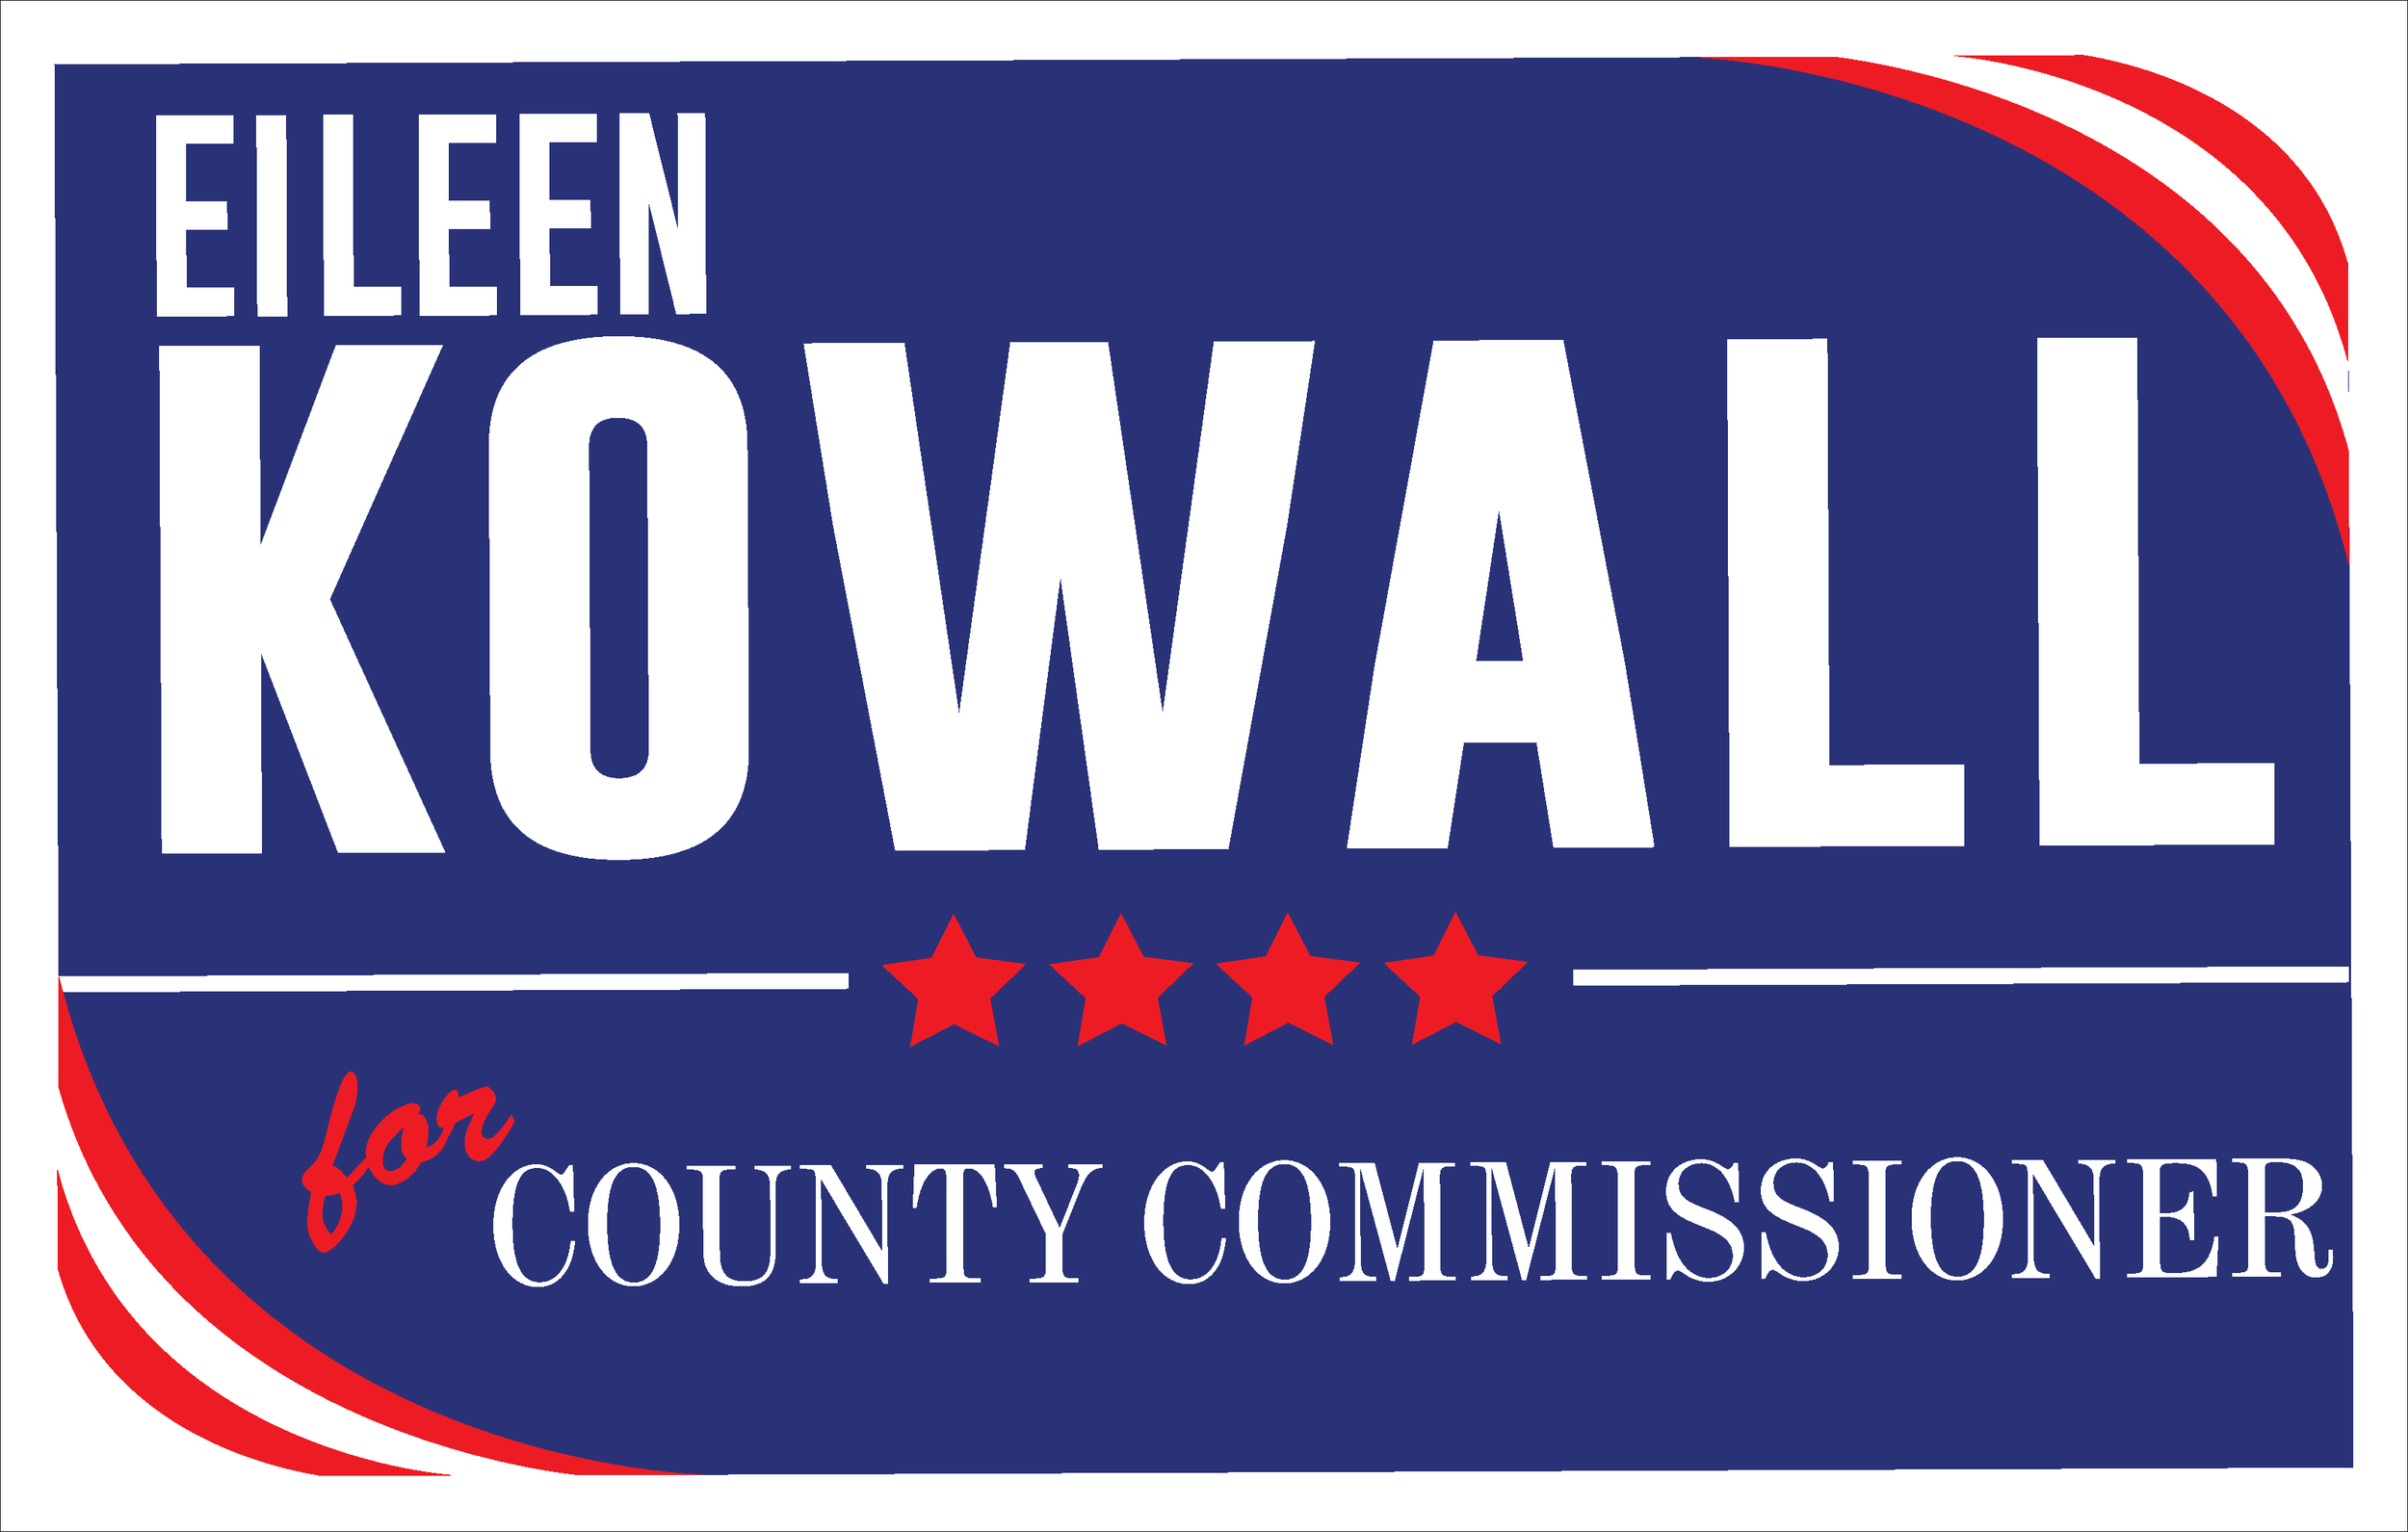 Eileen Kowall Sign Layout.png